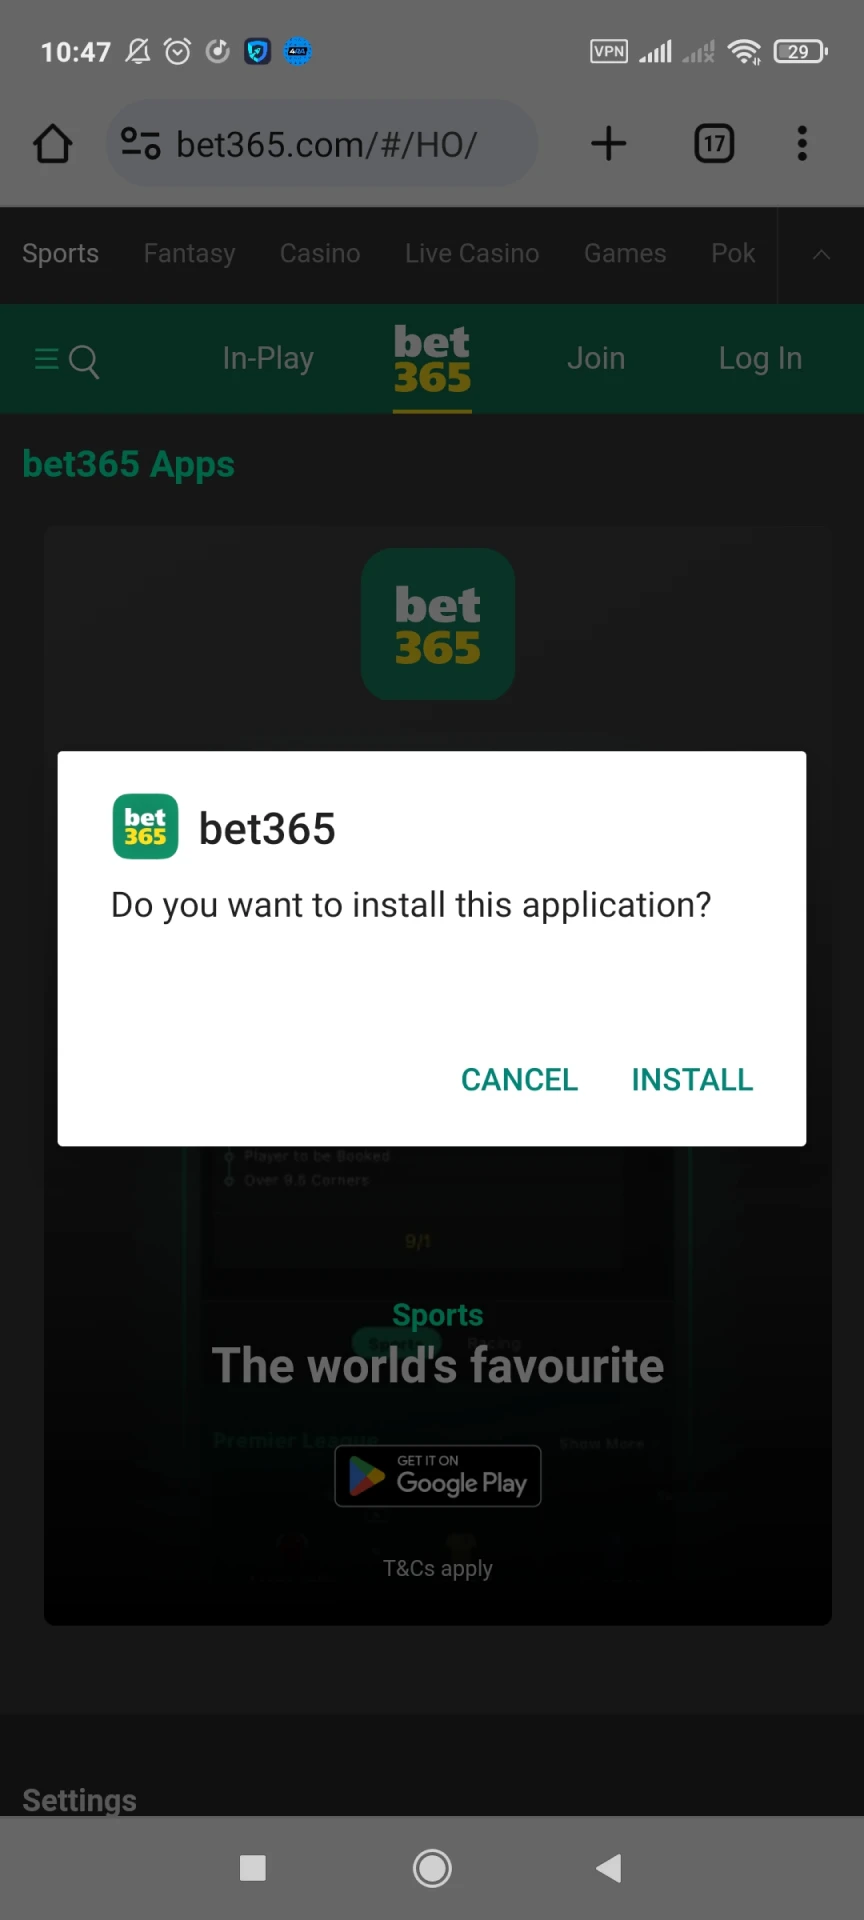 Start installing the Bet365 application on Android.